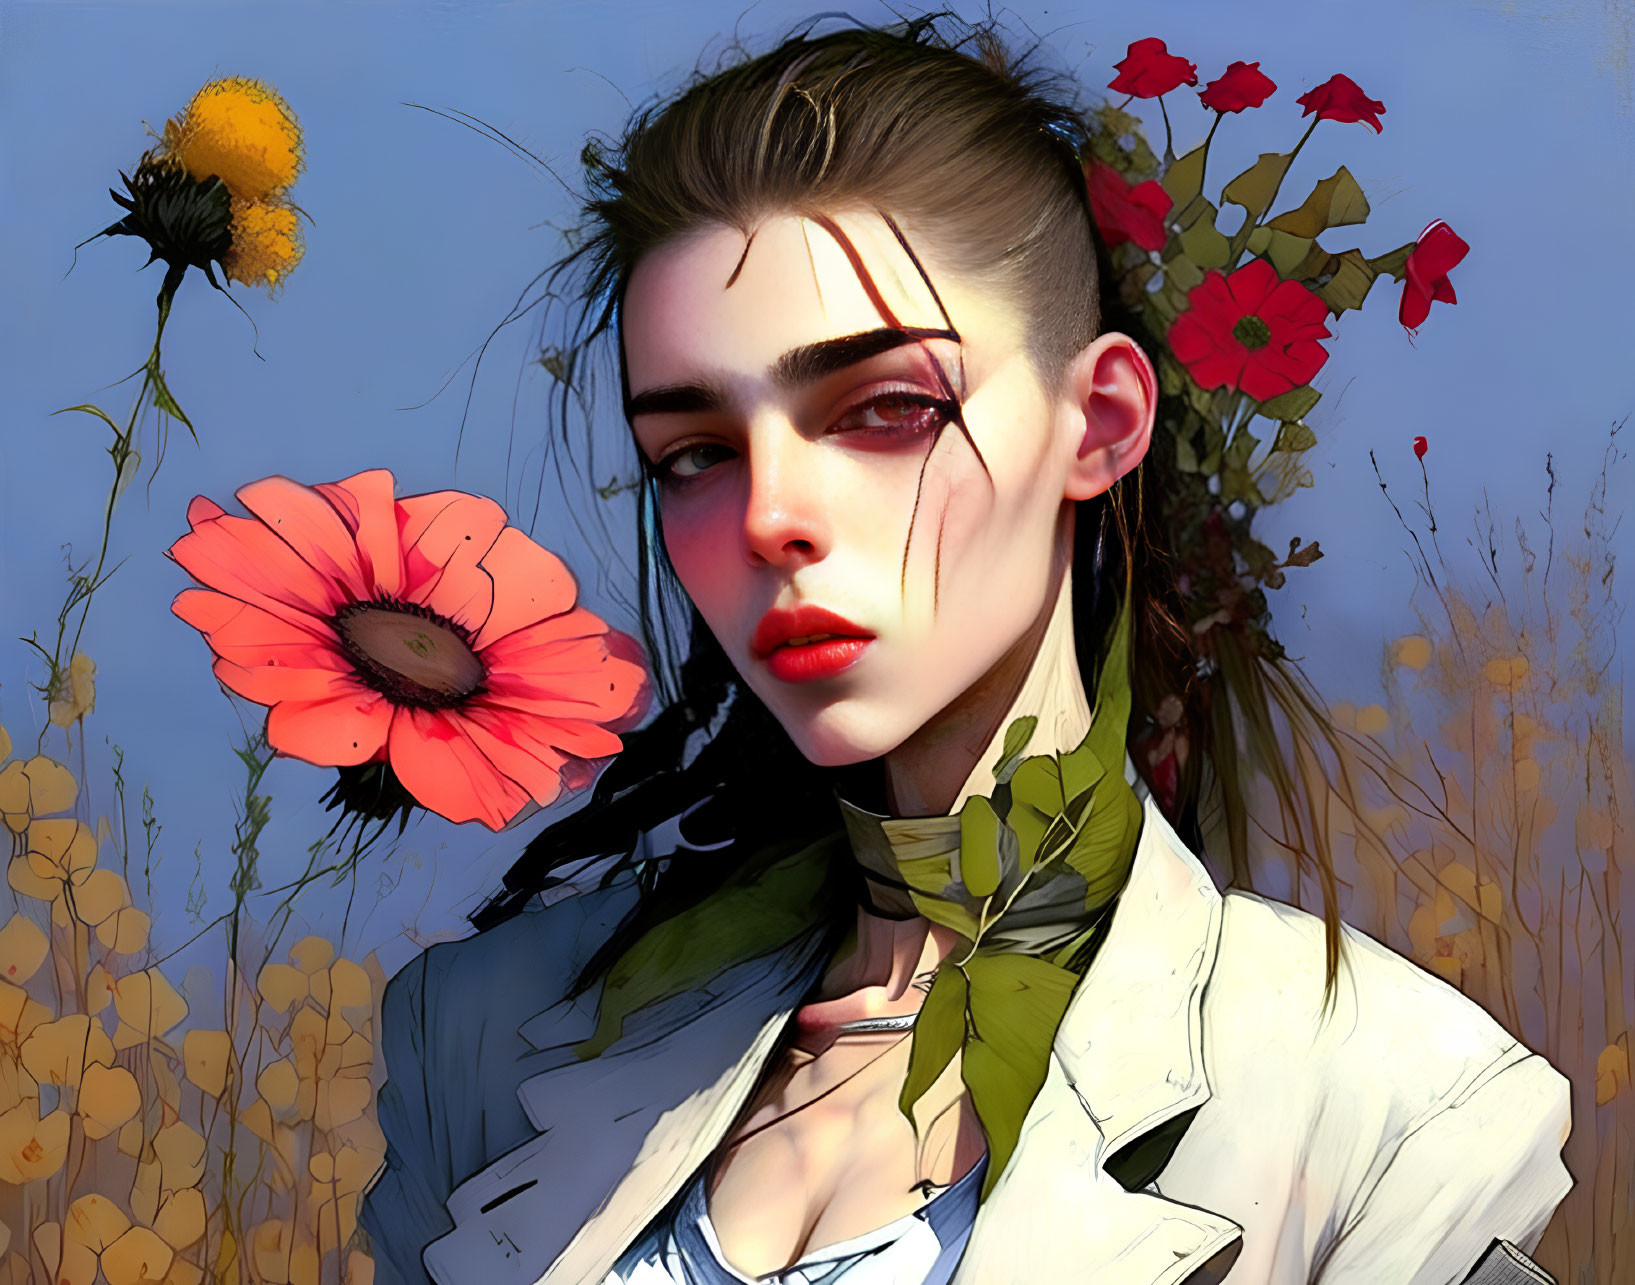 Stylized portrait of woman with striking makeup in vibrant wildflower setting